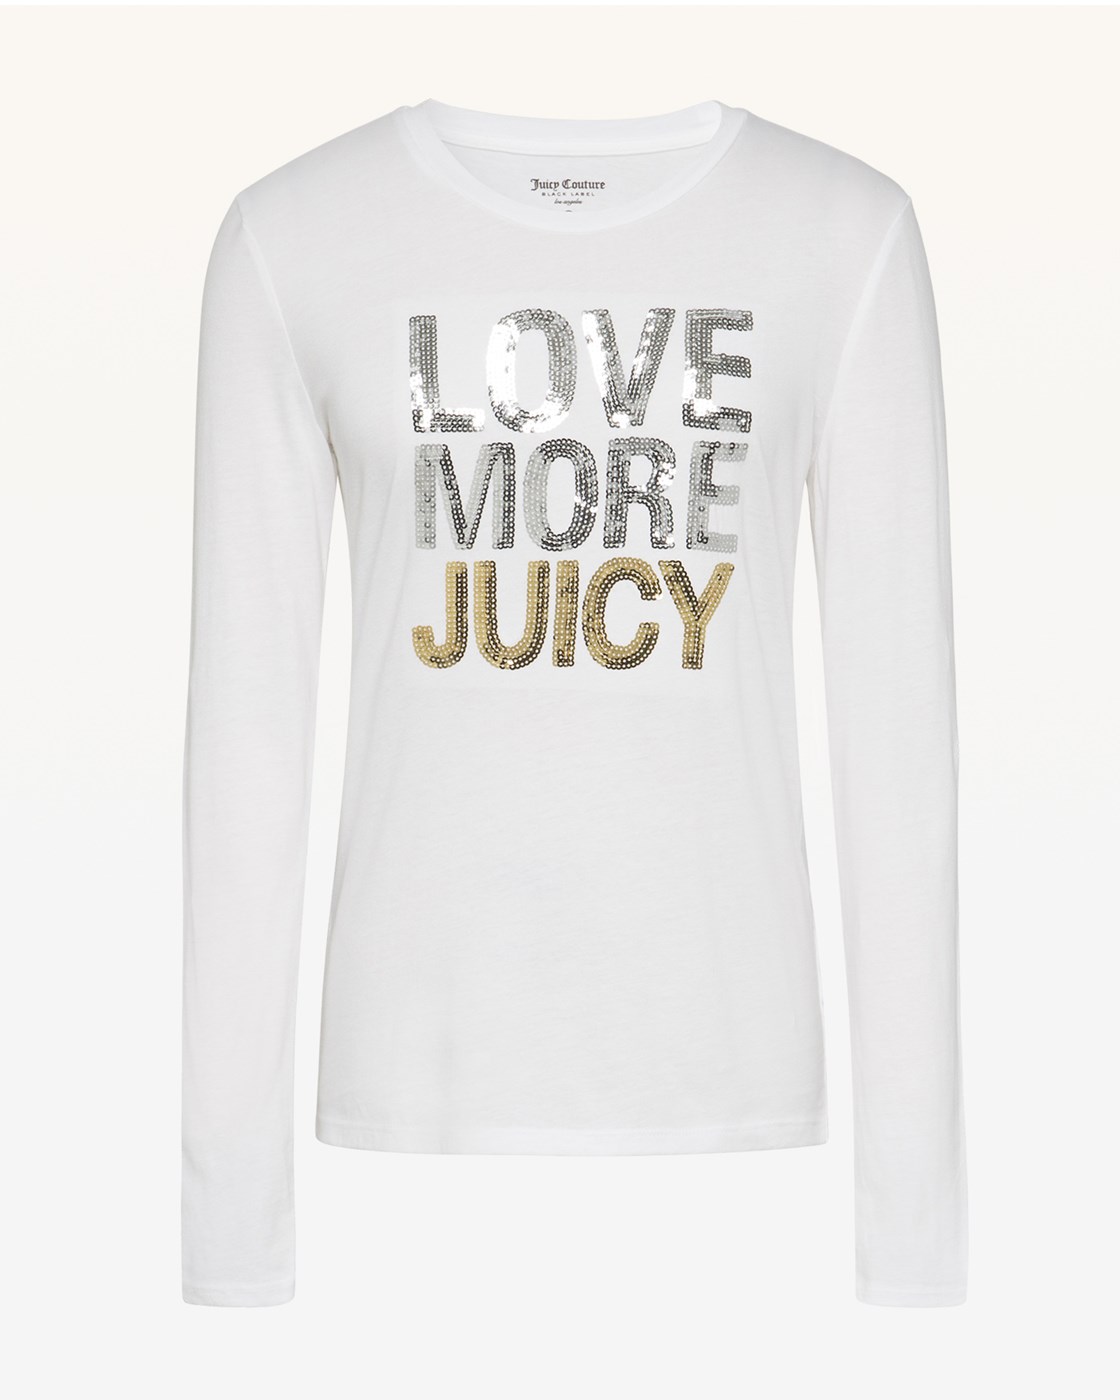 Juicy Couture Love More Long Sleeve Tee